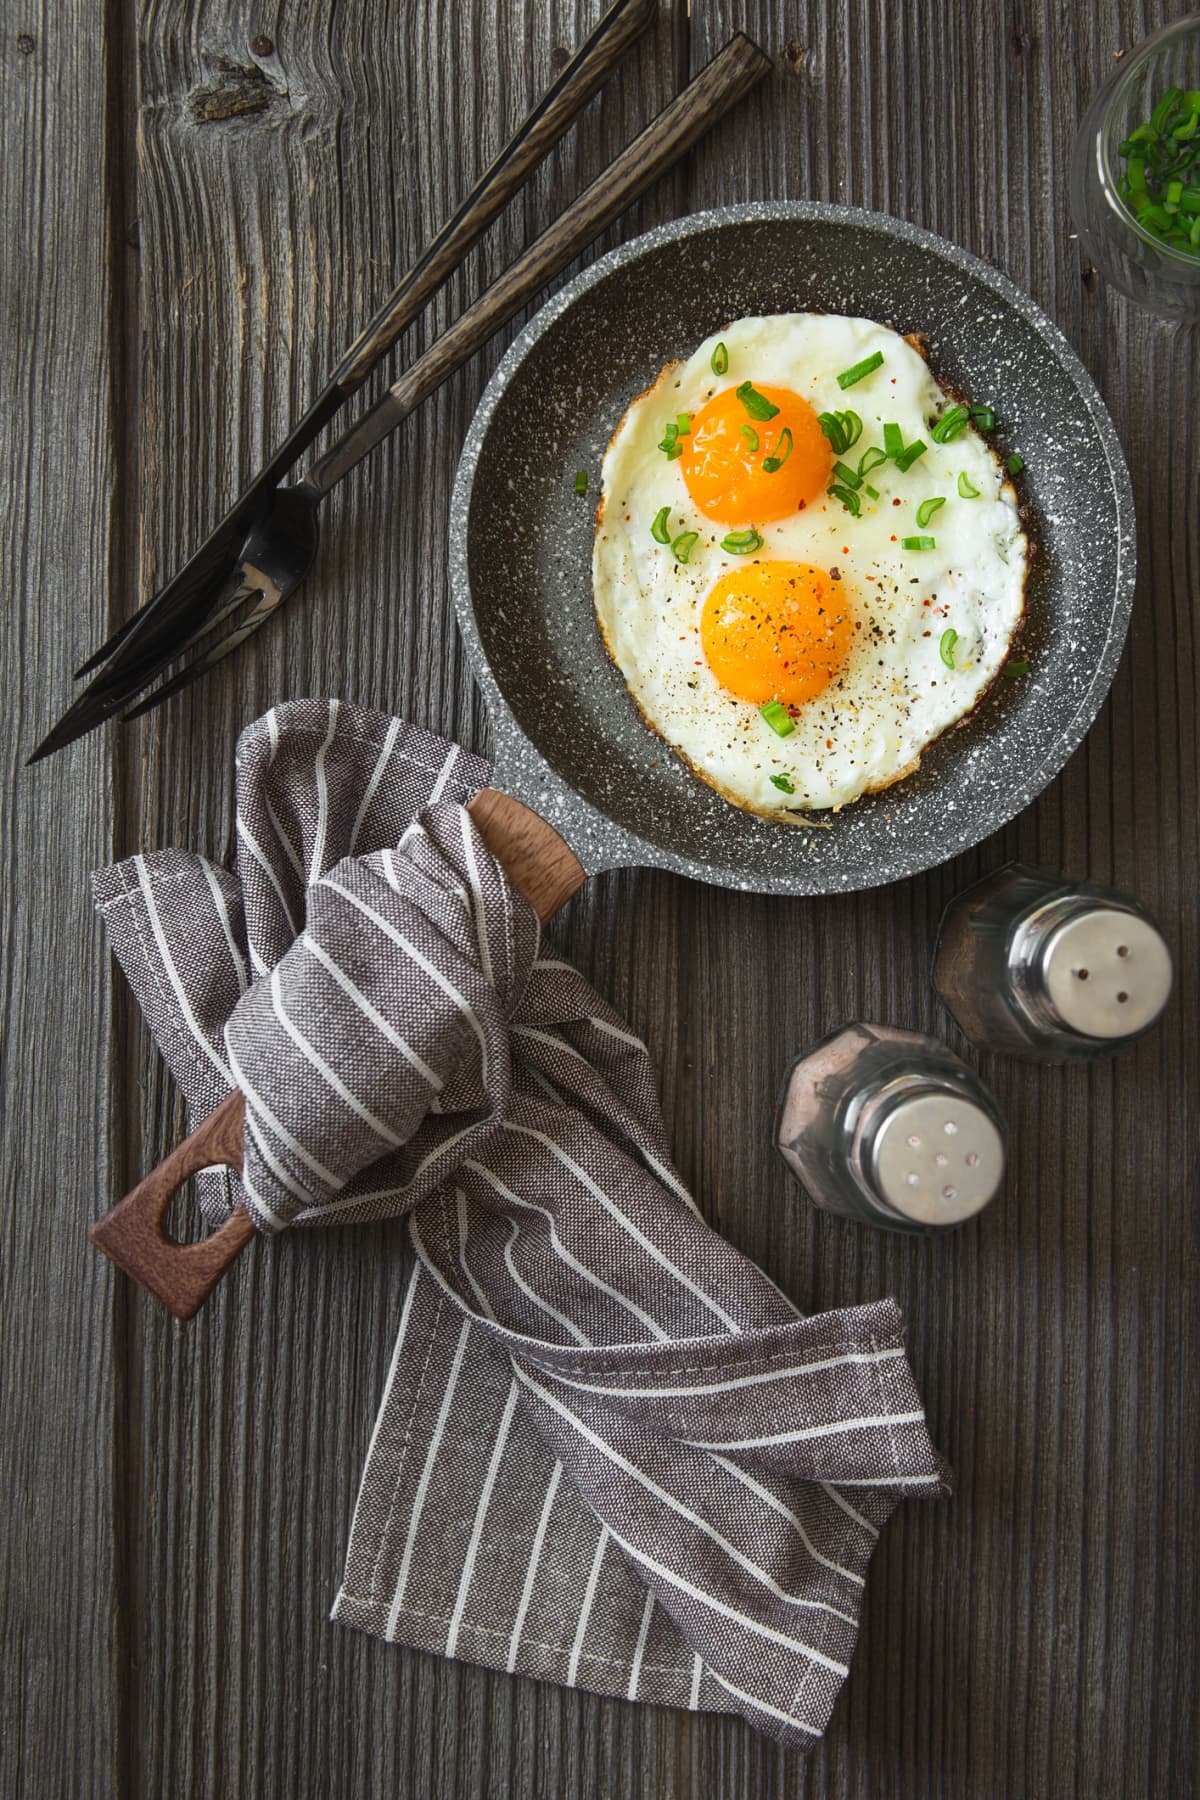 Fried eggs with green chives chopped for breakfast. Two fried eggs in a small pan on the dark wooden background, top view. Flat lay. Rustic style.